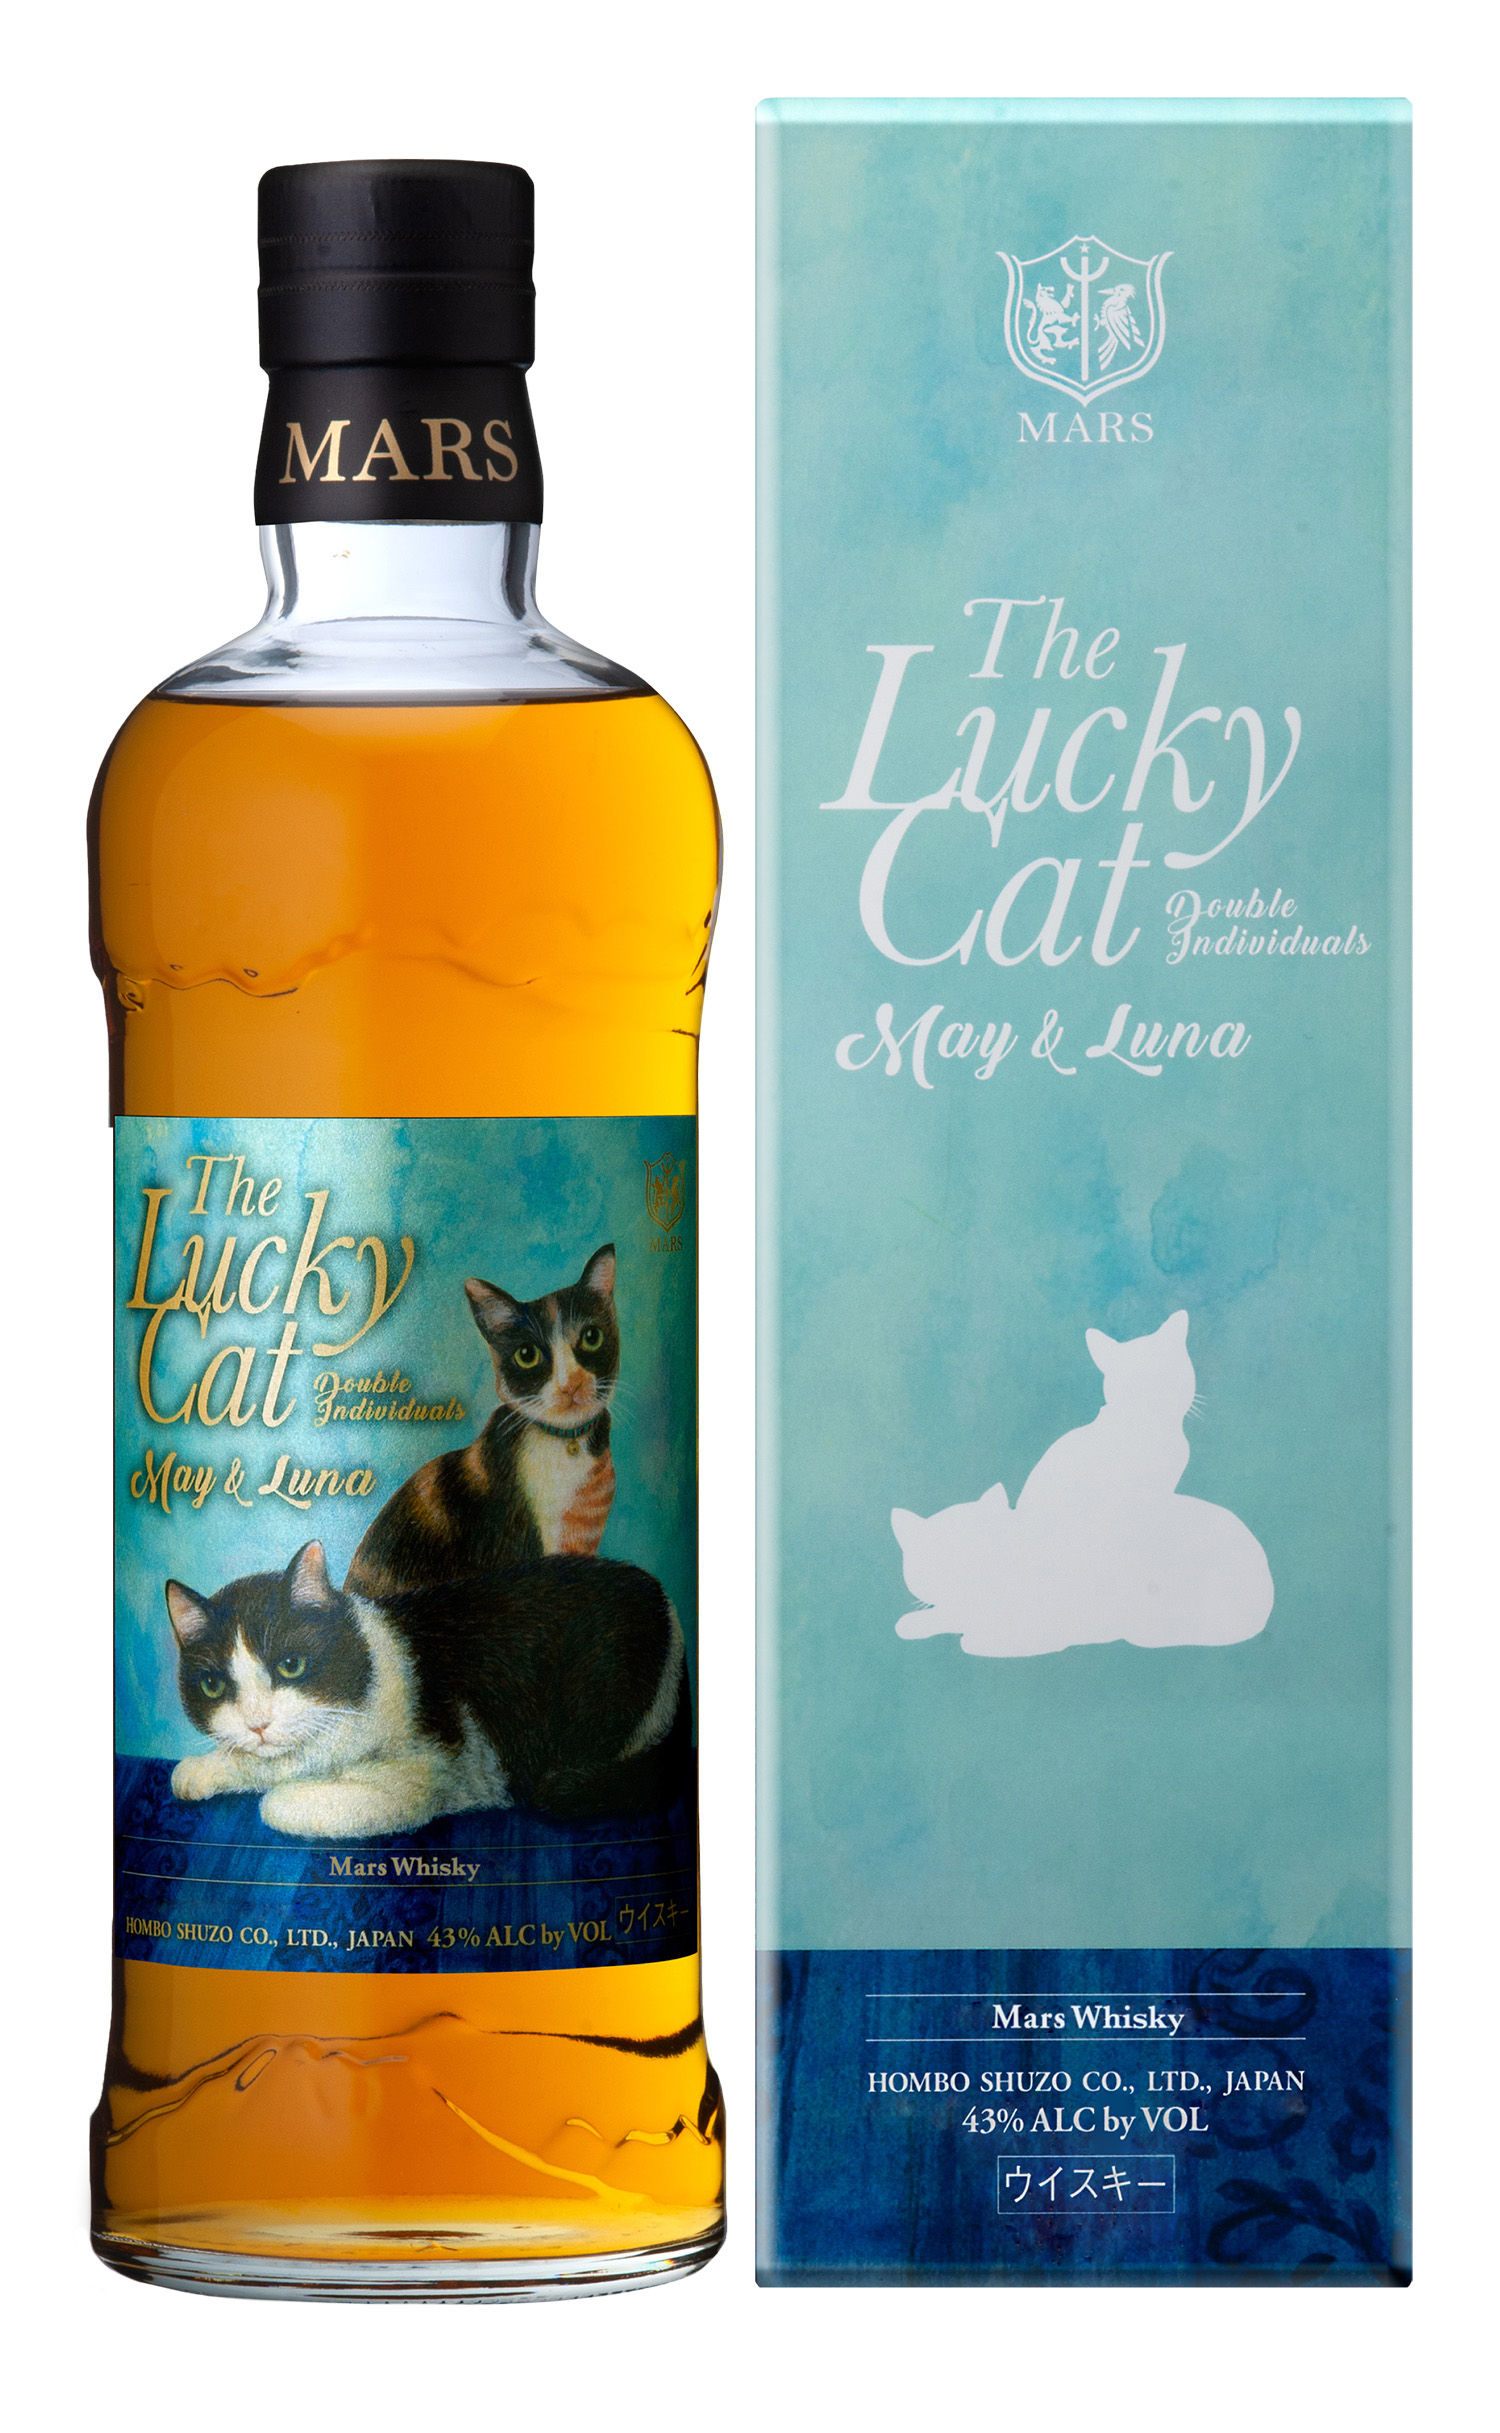 Whisky, 'The Lucky Cat, May & Luna', Mars Whisky - Skurnik Wines